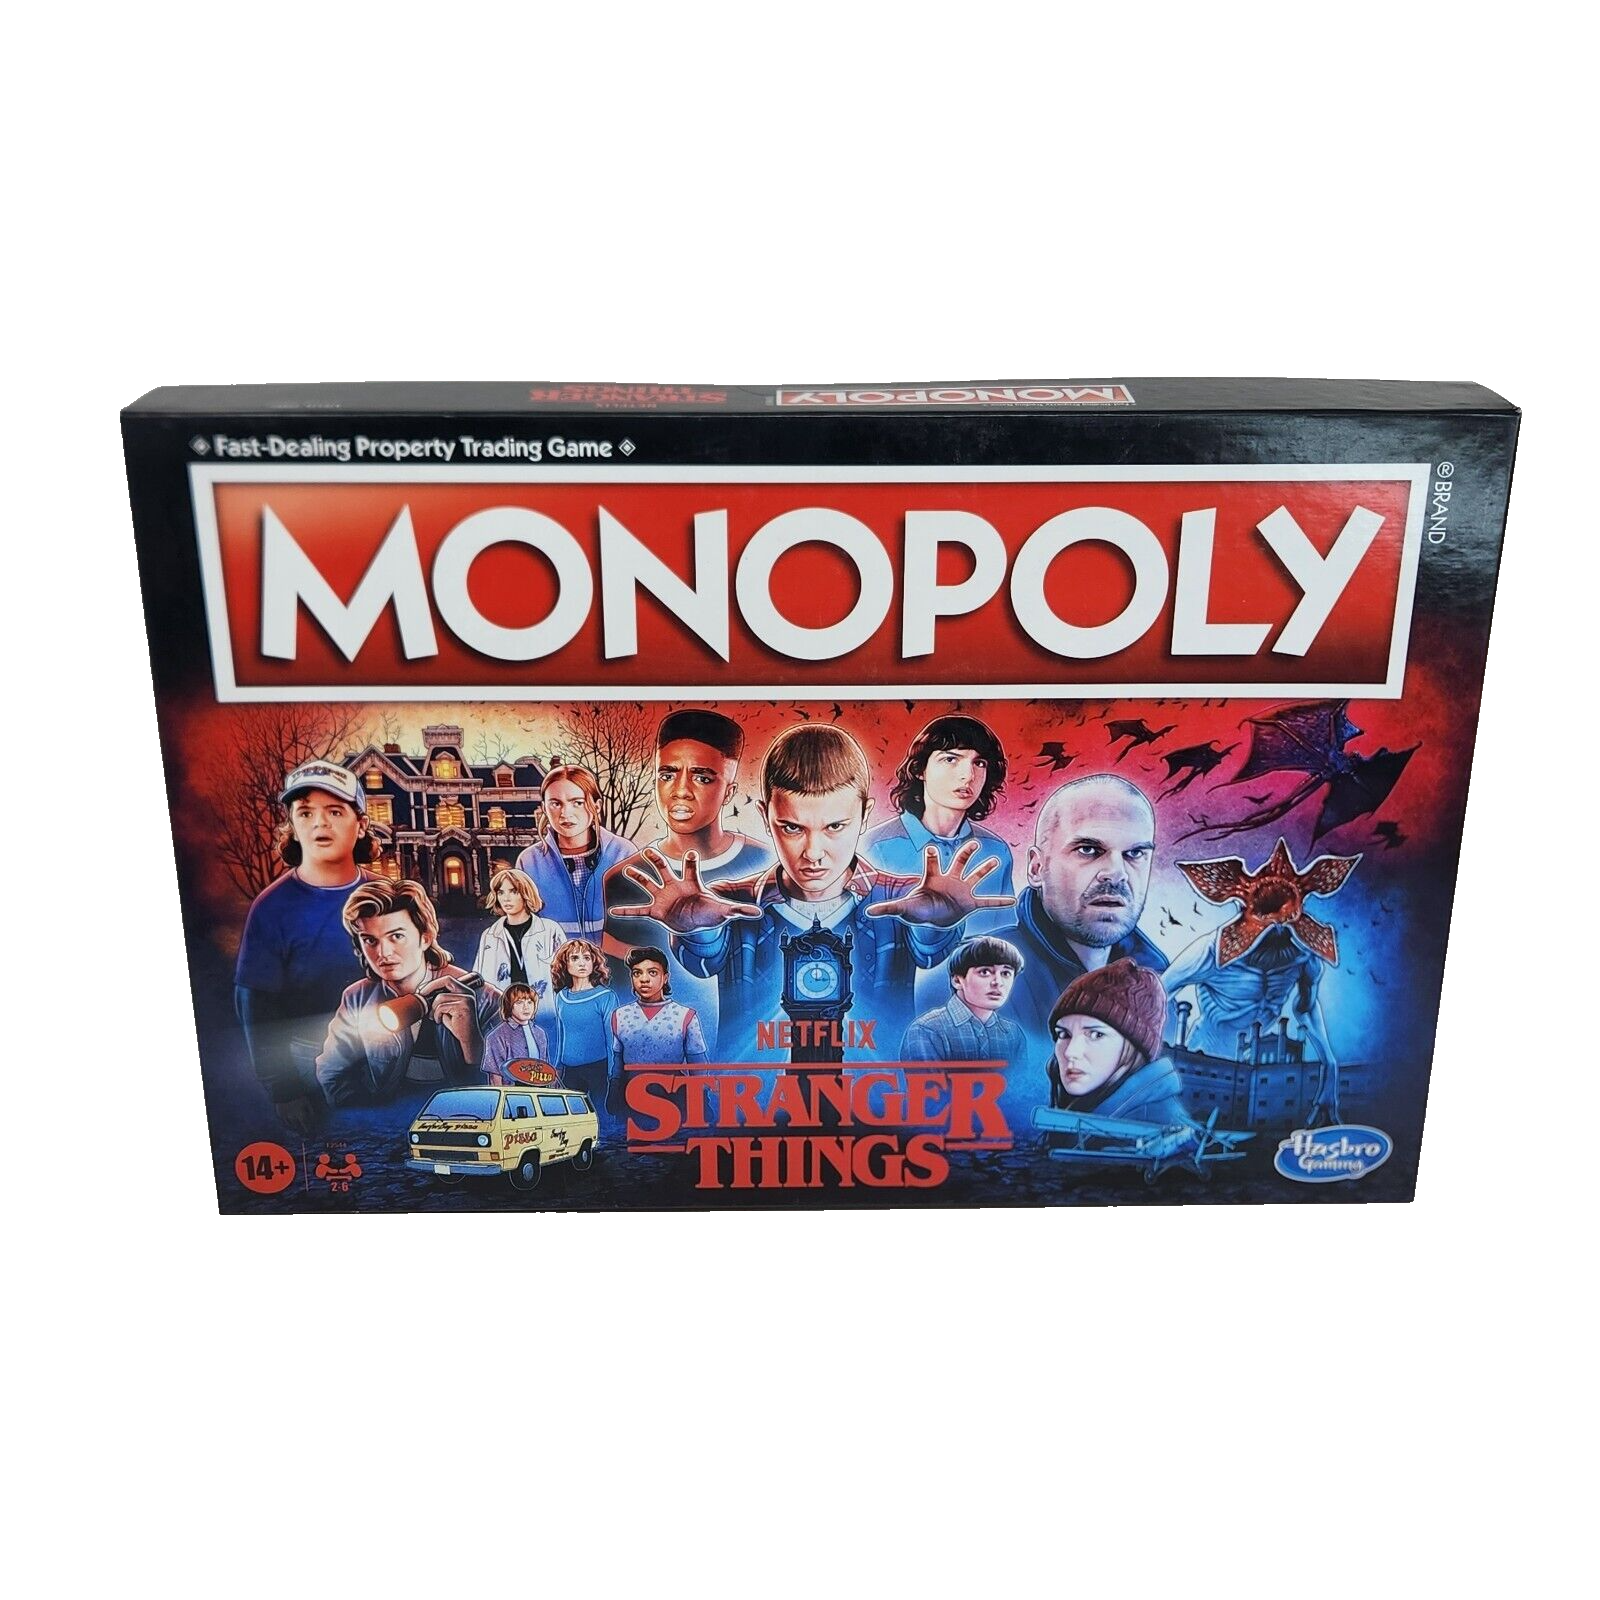 Primary image for MONOPOLY BOARD GAME NETFLIX STRANGER THINGS 100% COMPLETE NEW SEALED